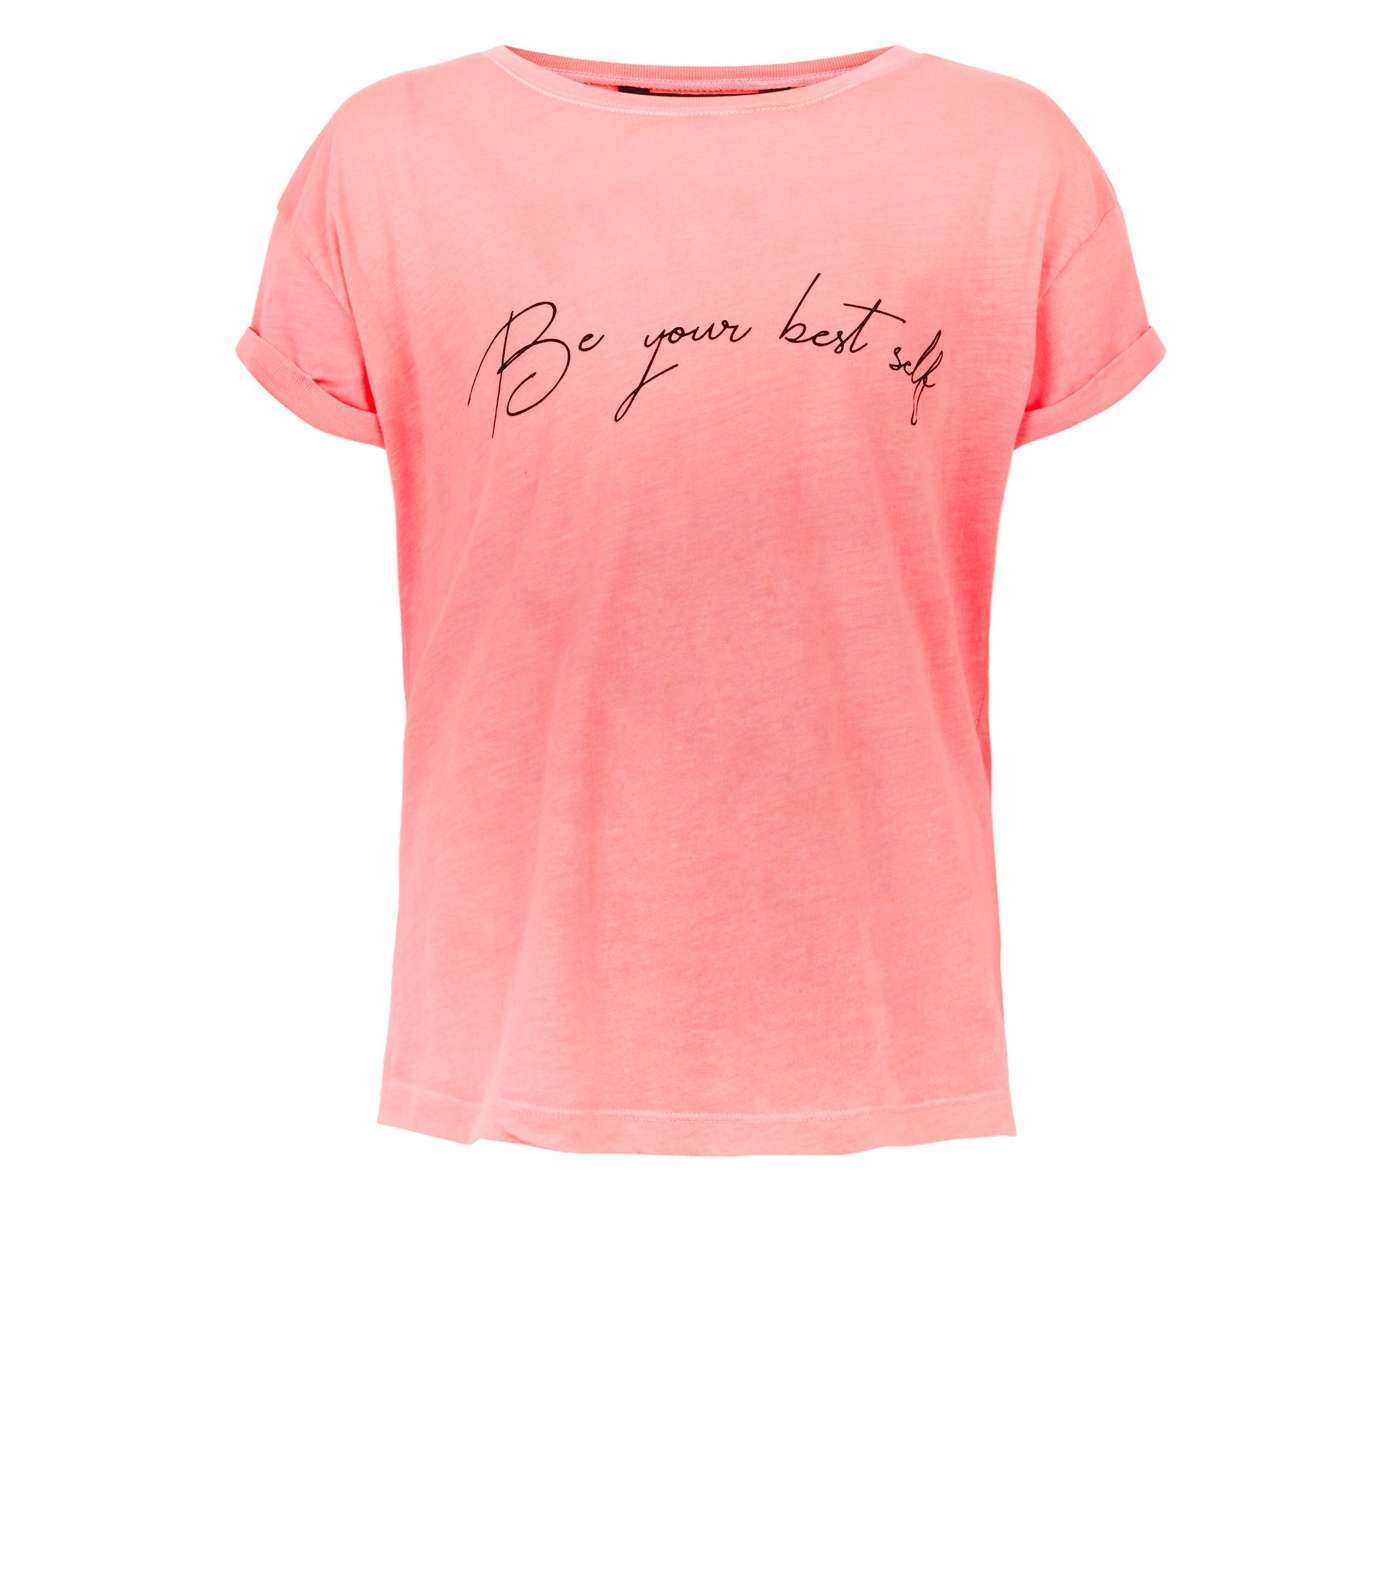 Girls Bright Pink Be Your Best Self Slogan T-Shirt Image 4